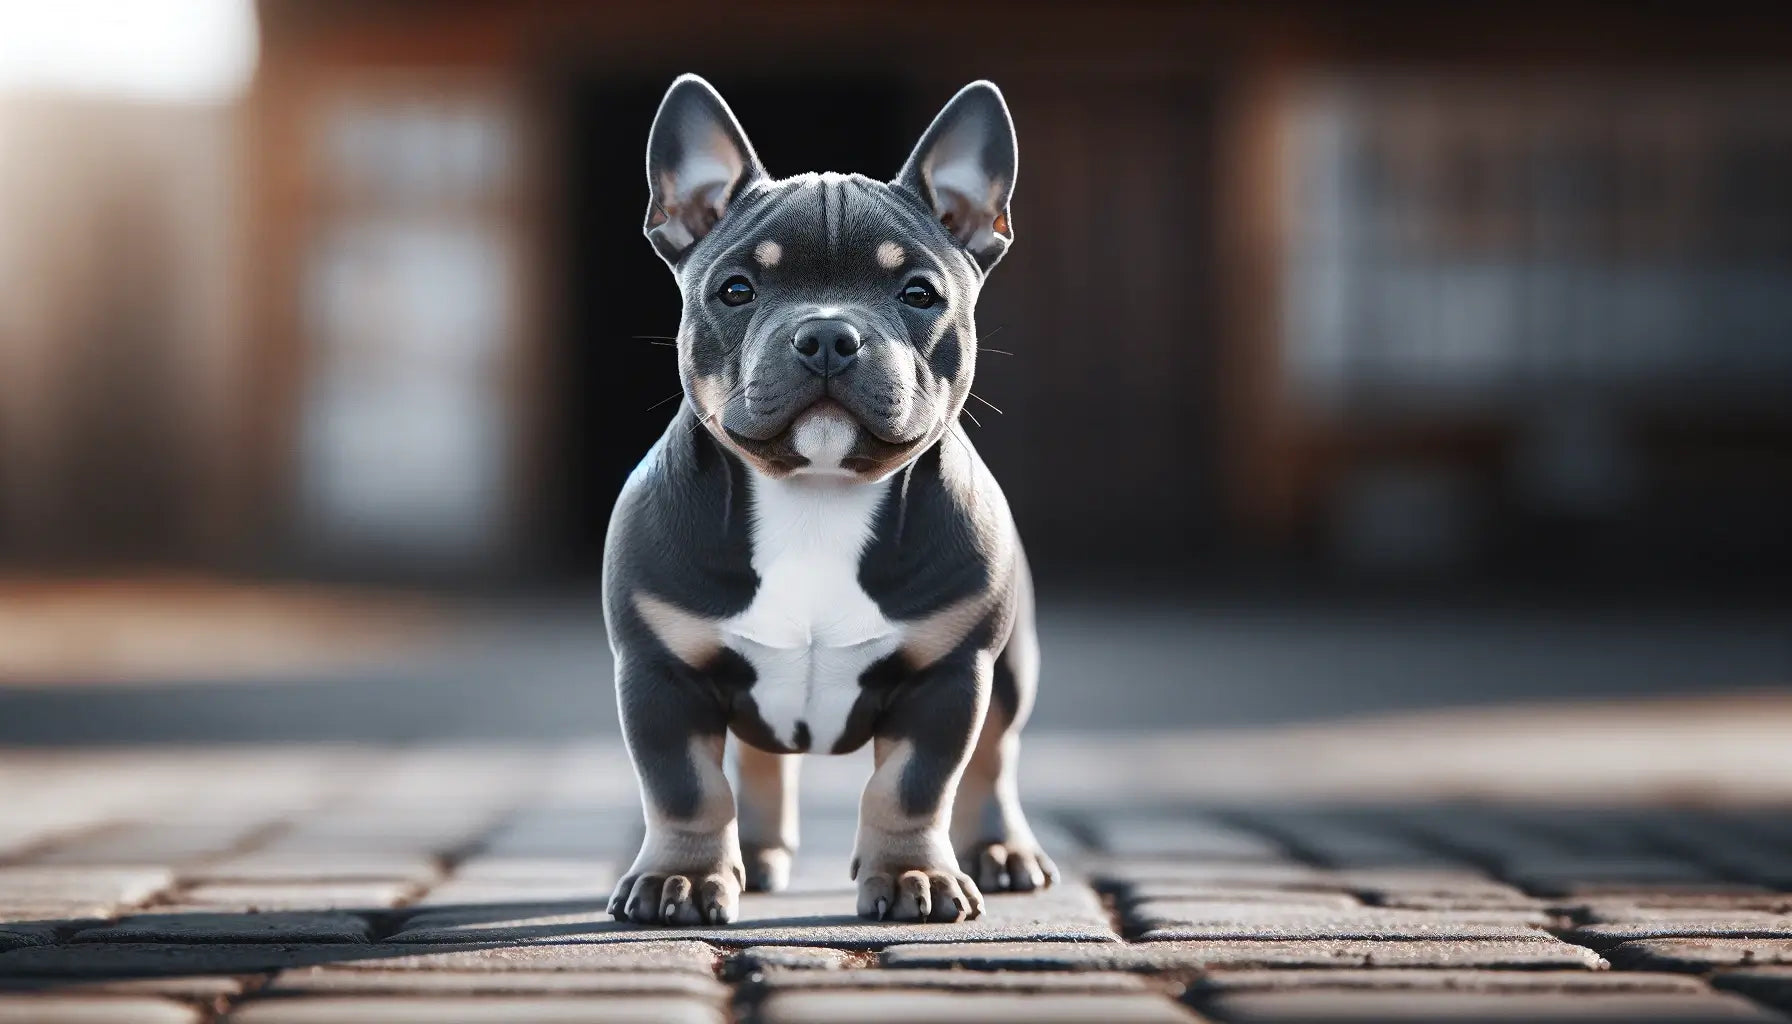 Micro Bully showcasing a strong and stable temperament with a confident pose and stance